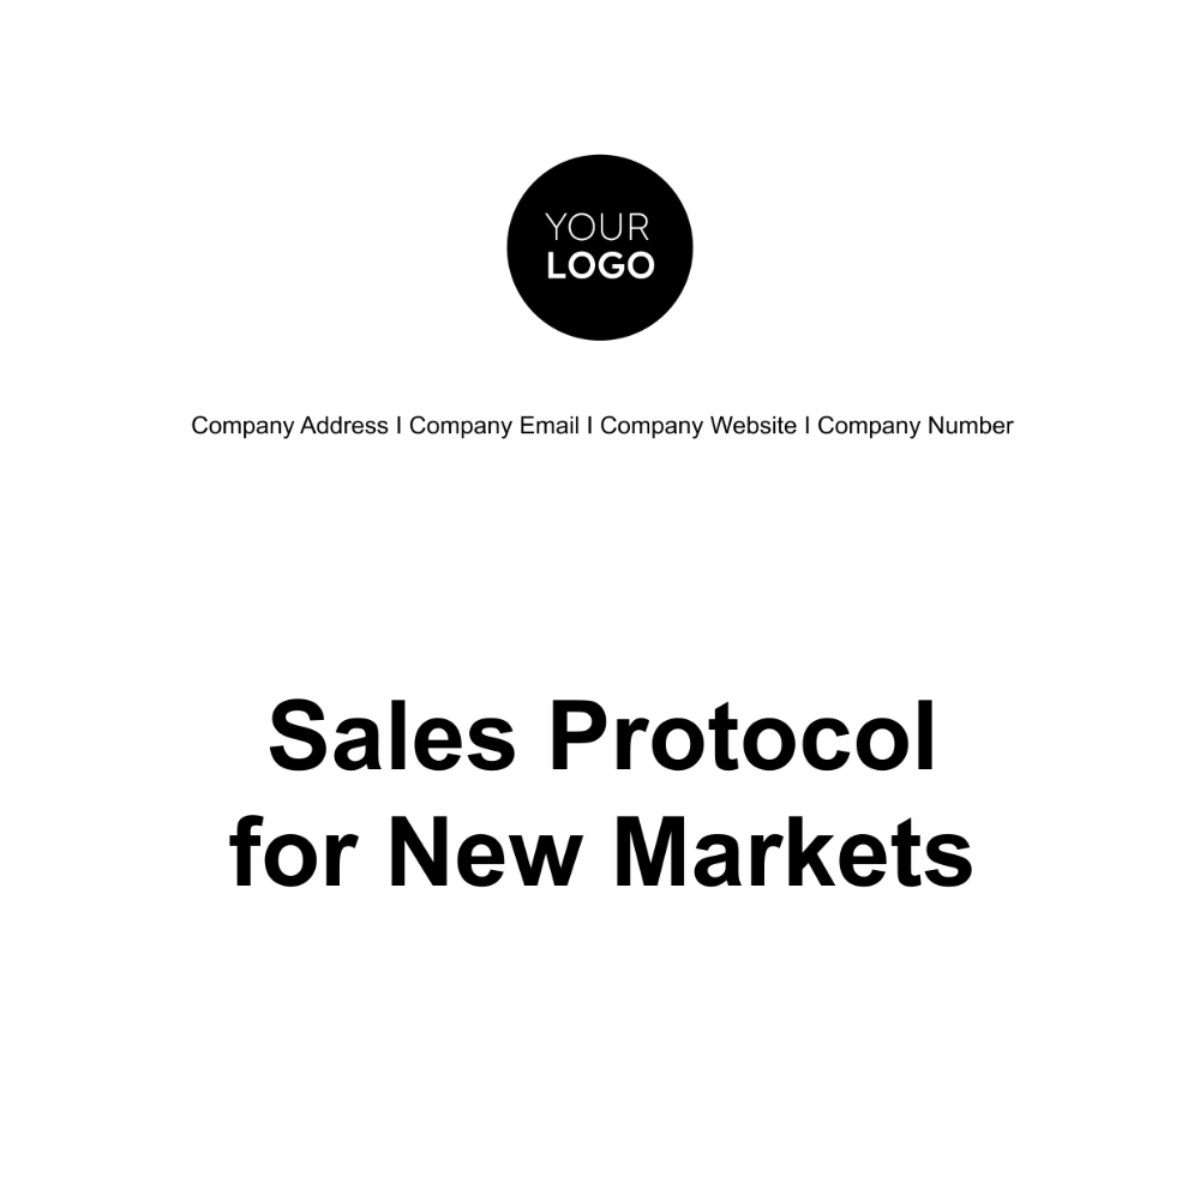 Sales Protocol for New Markets Template